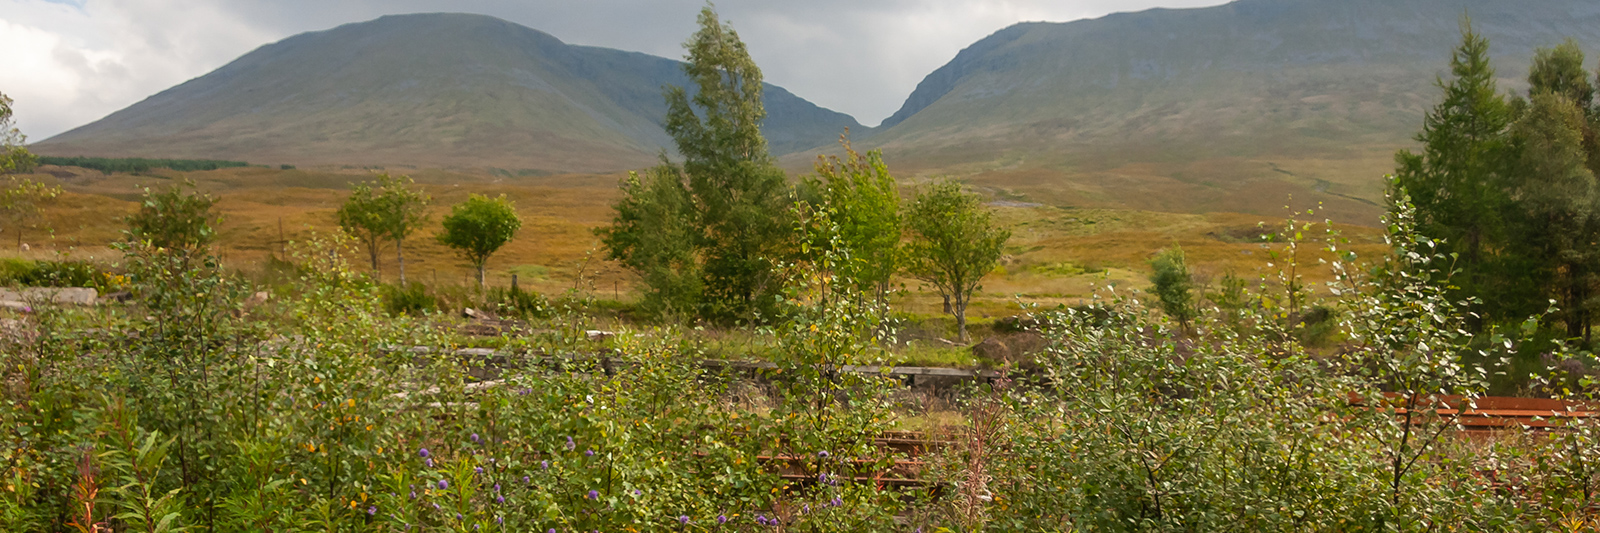 View from a Mallaig-bound West Highland Line train on Rannoch Moor, Scotland, UK, 2010.